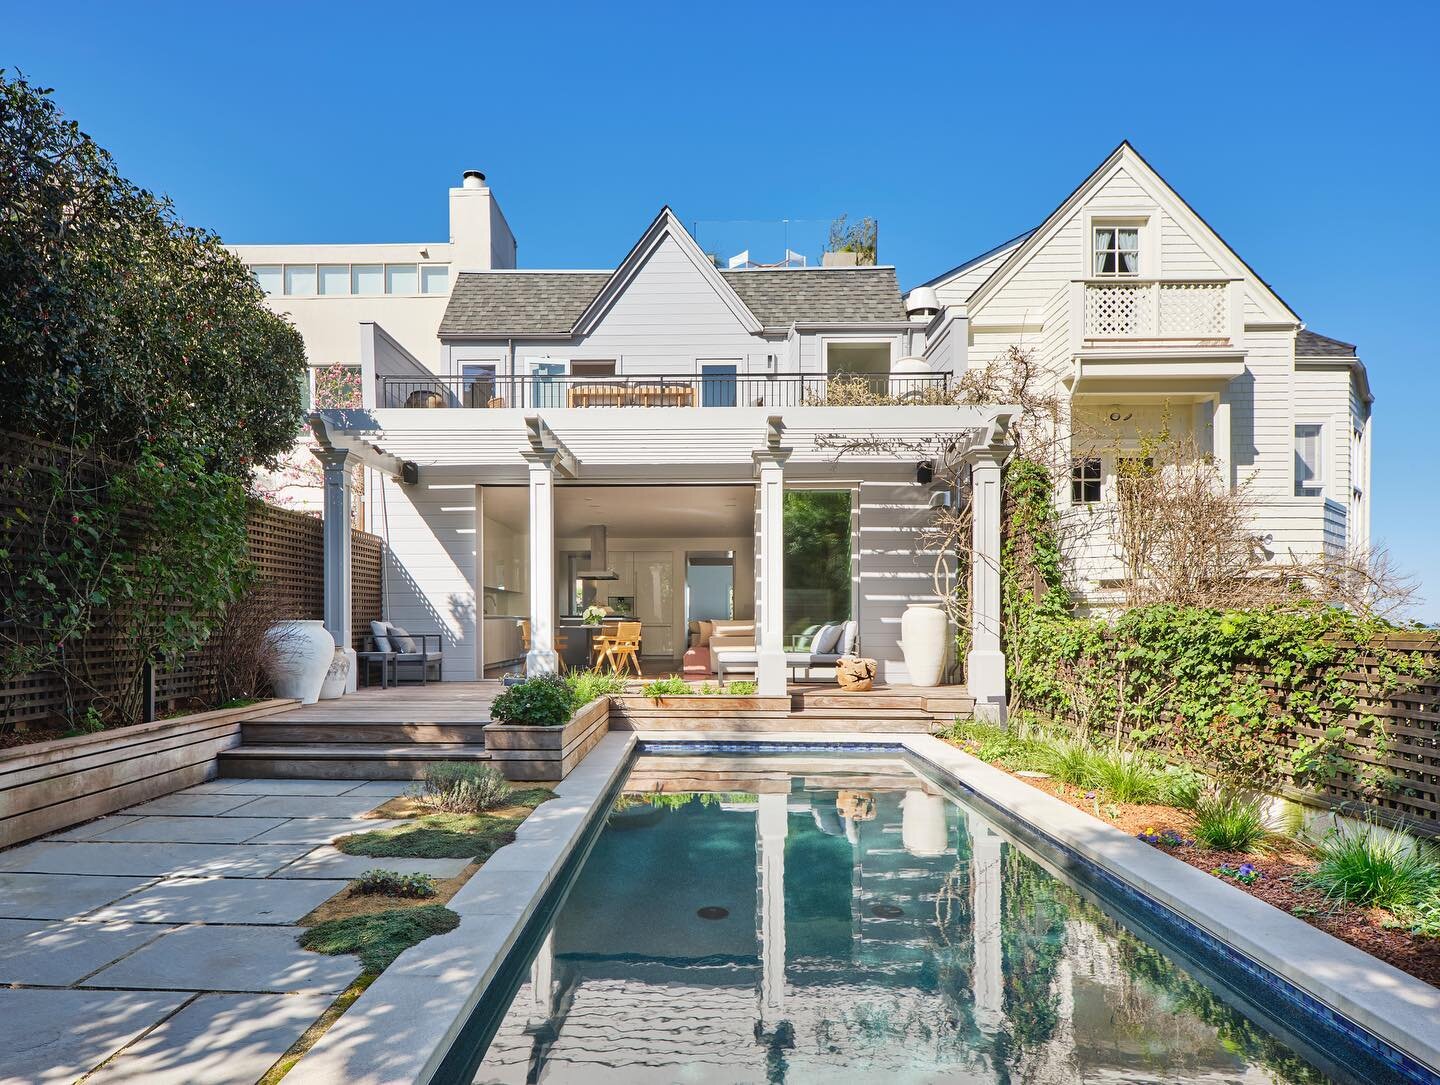 Happy first day of Summer! Who needs to go to for a swim today? ☀️💦
#sf #sanfrancisco #sanfranciscosummer #summersolstice #luxuryhomes #sfluxuryrealestate